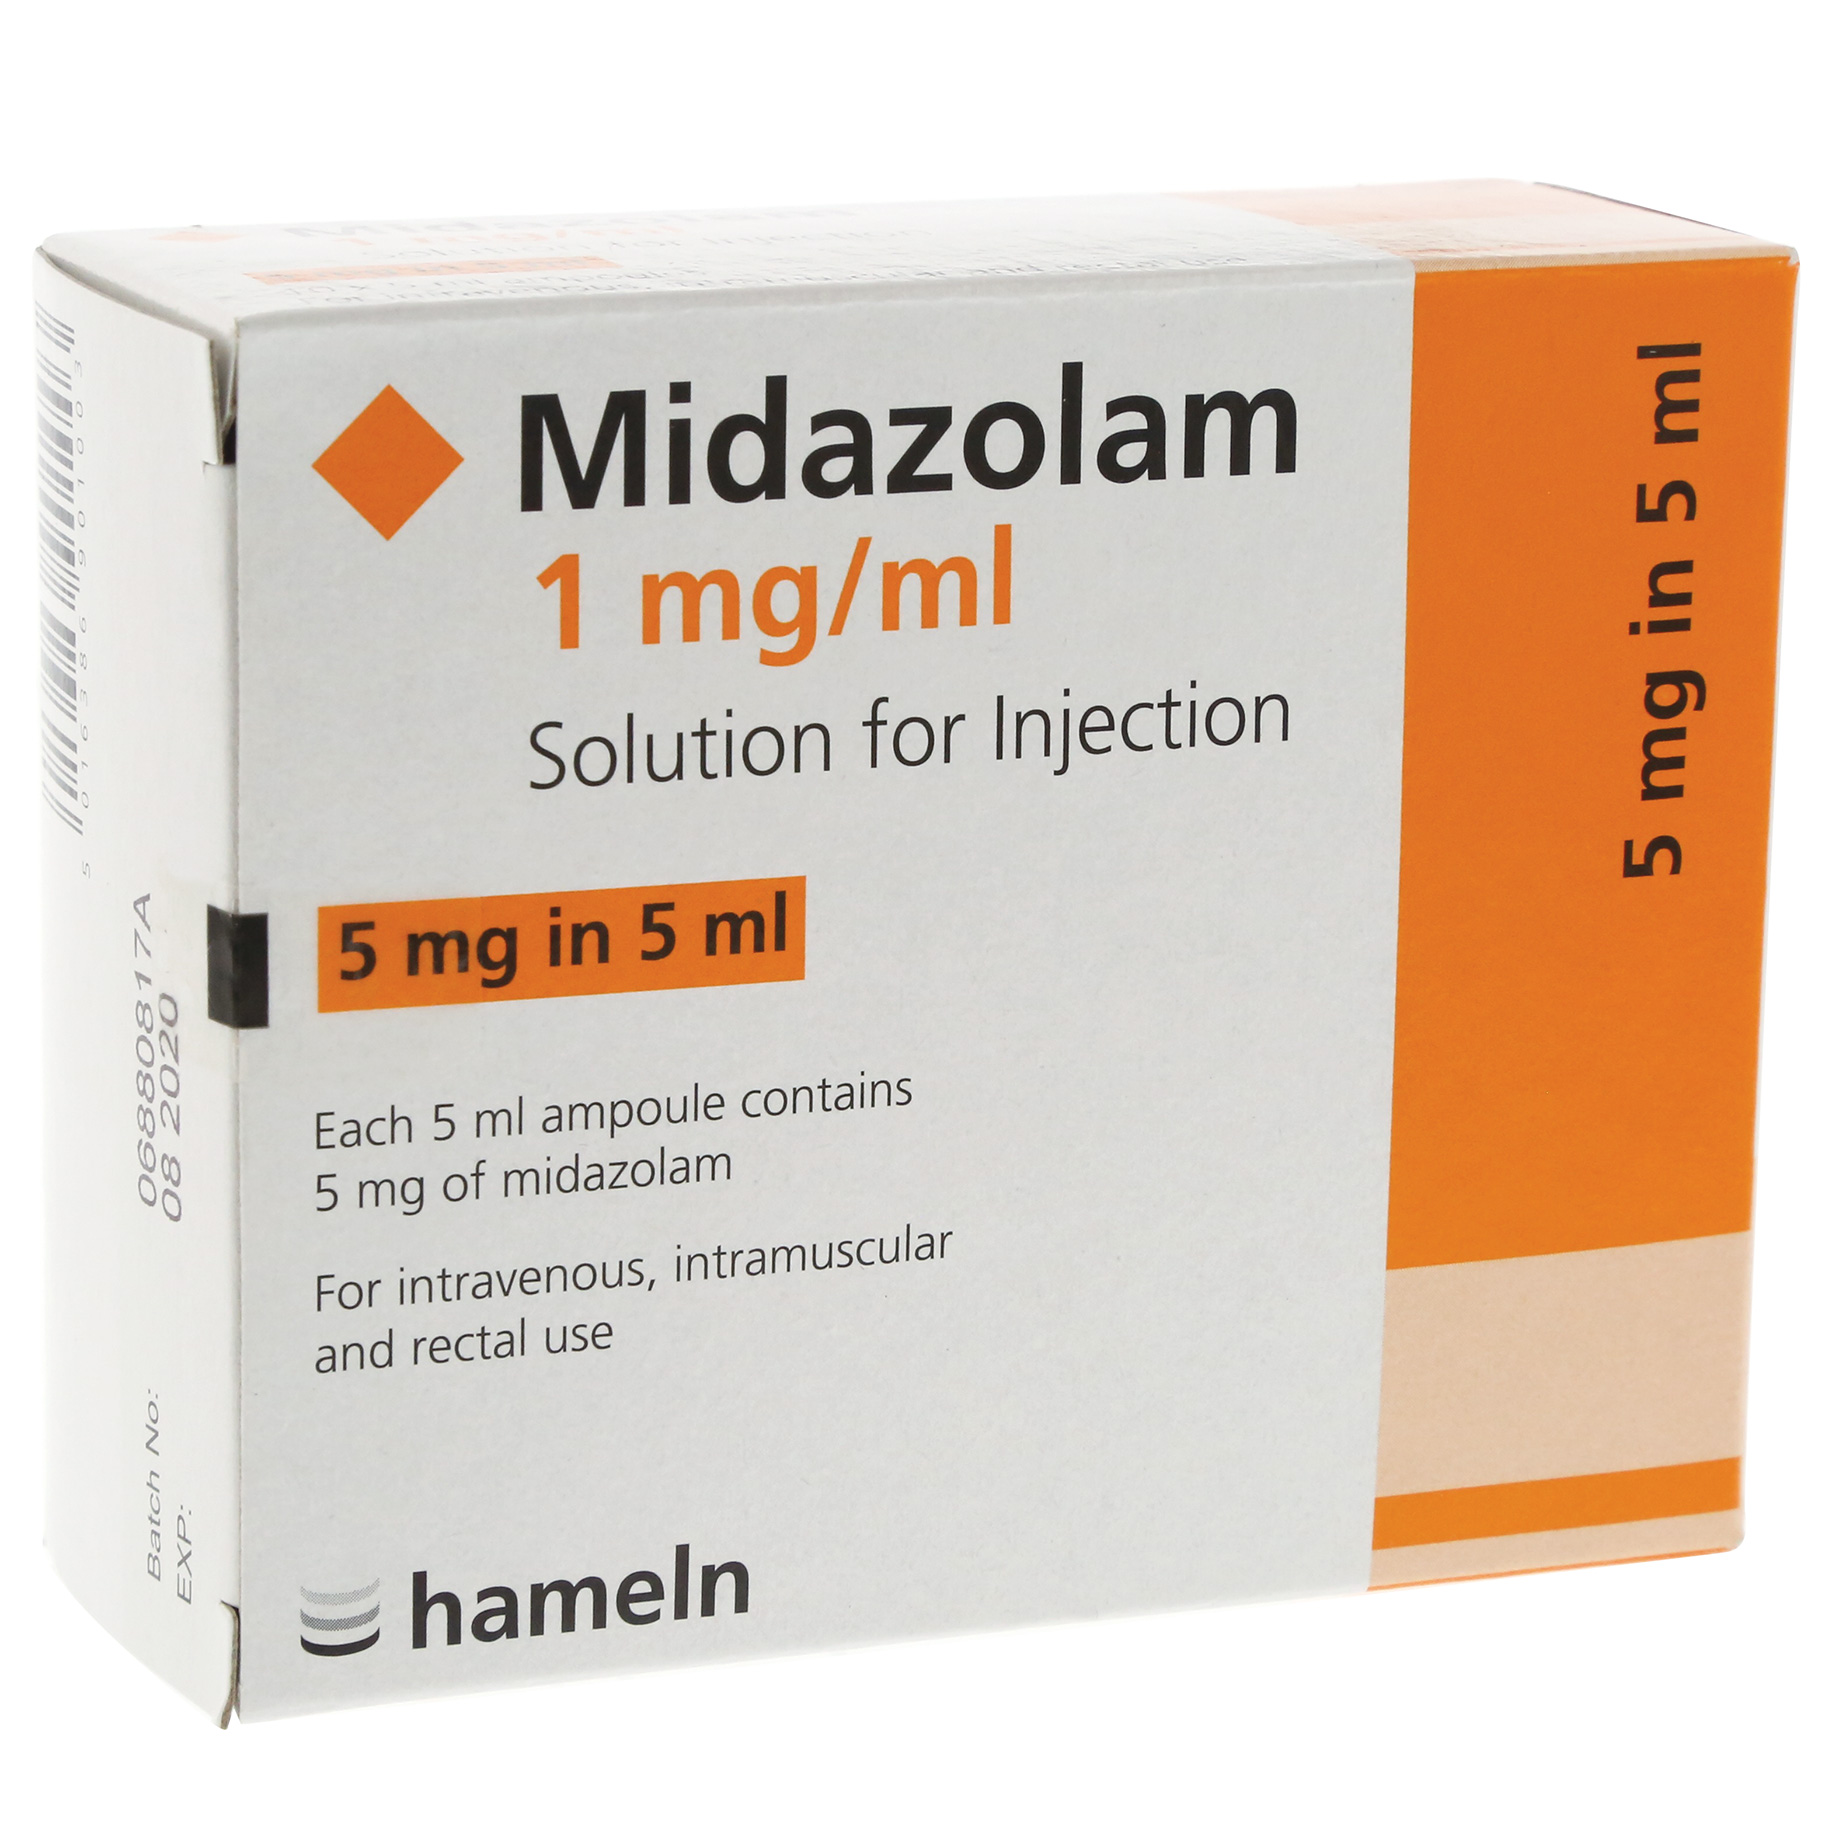 Midazolam 1mg/ml solution for injection, 5ml ampoules 